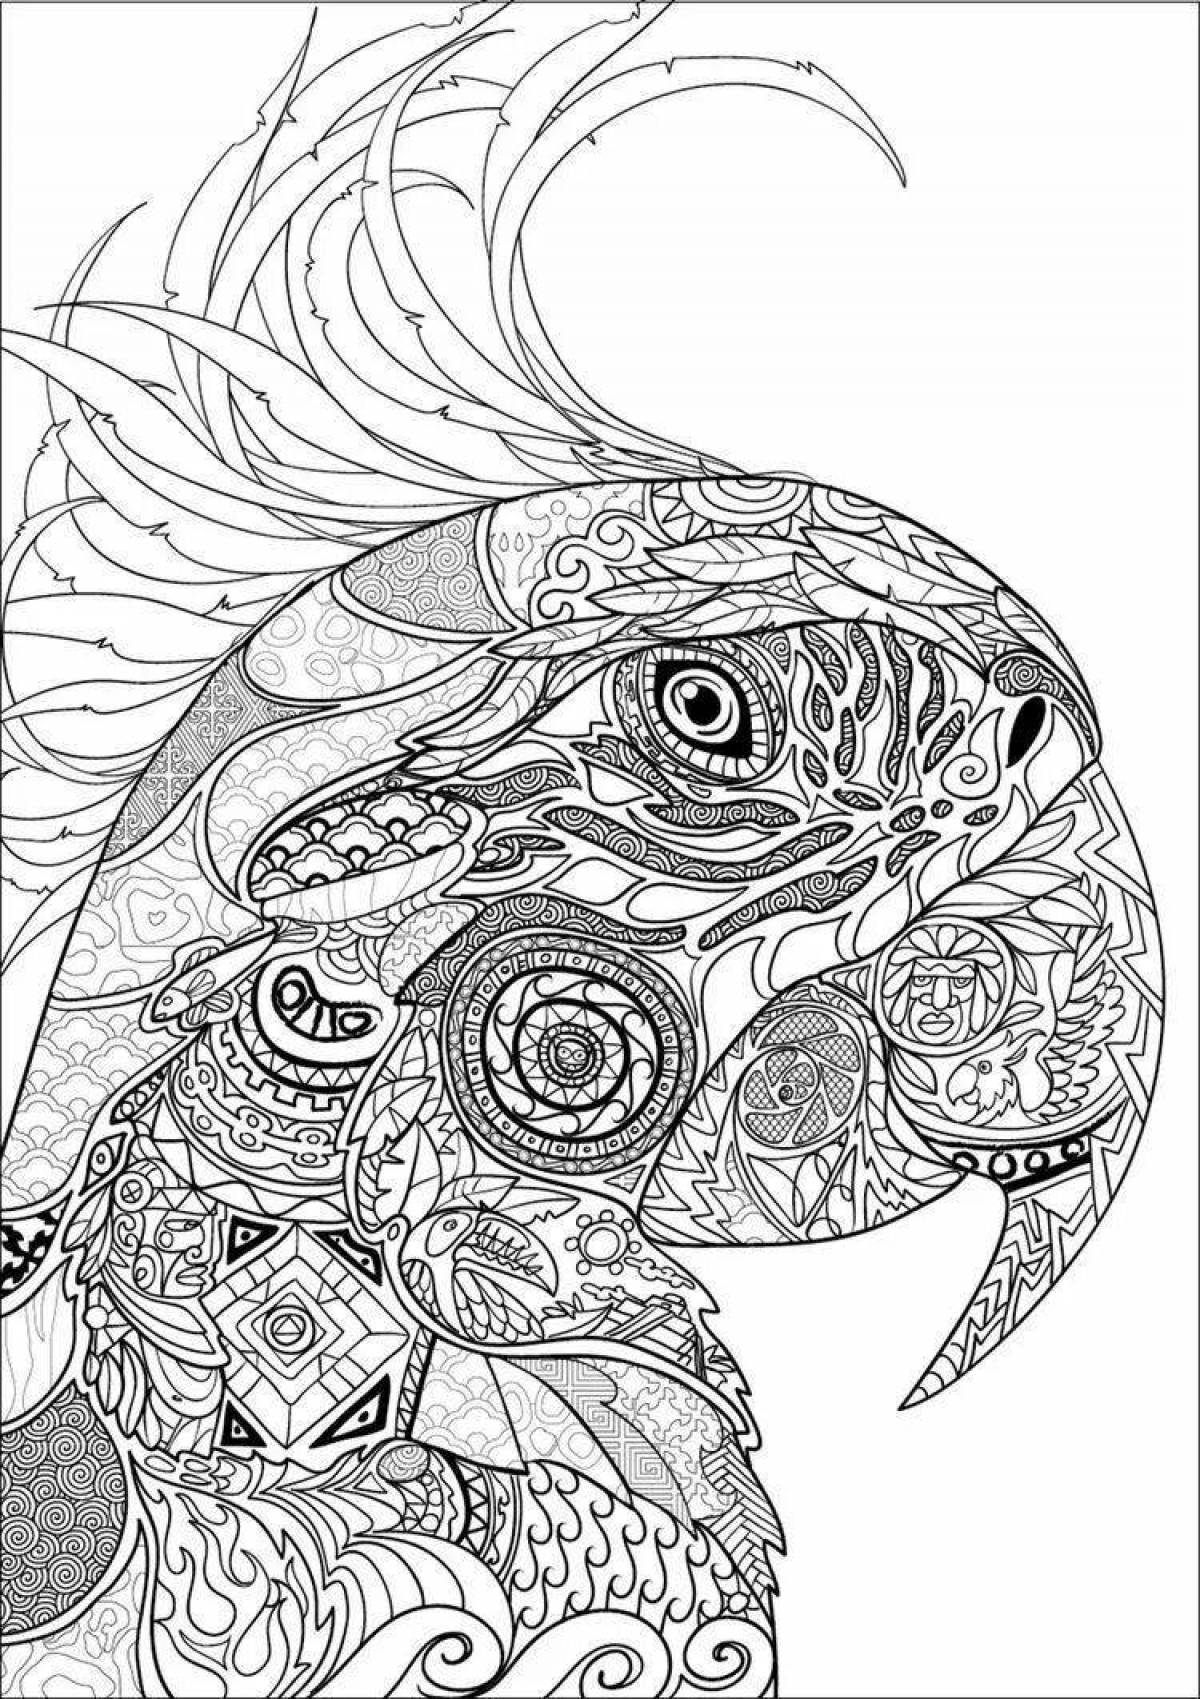 Great coloring book the best in the world